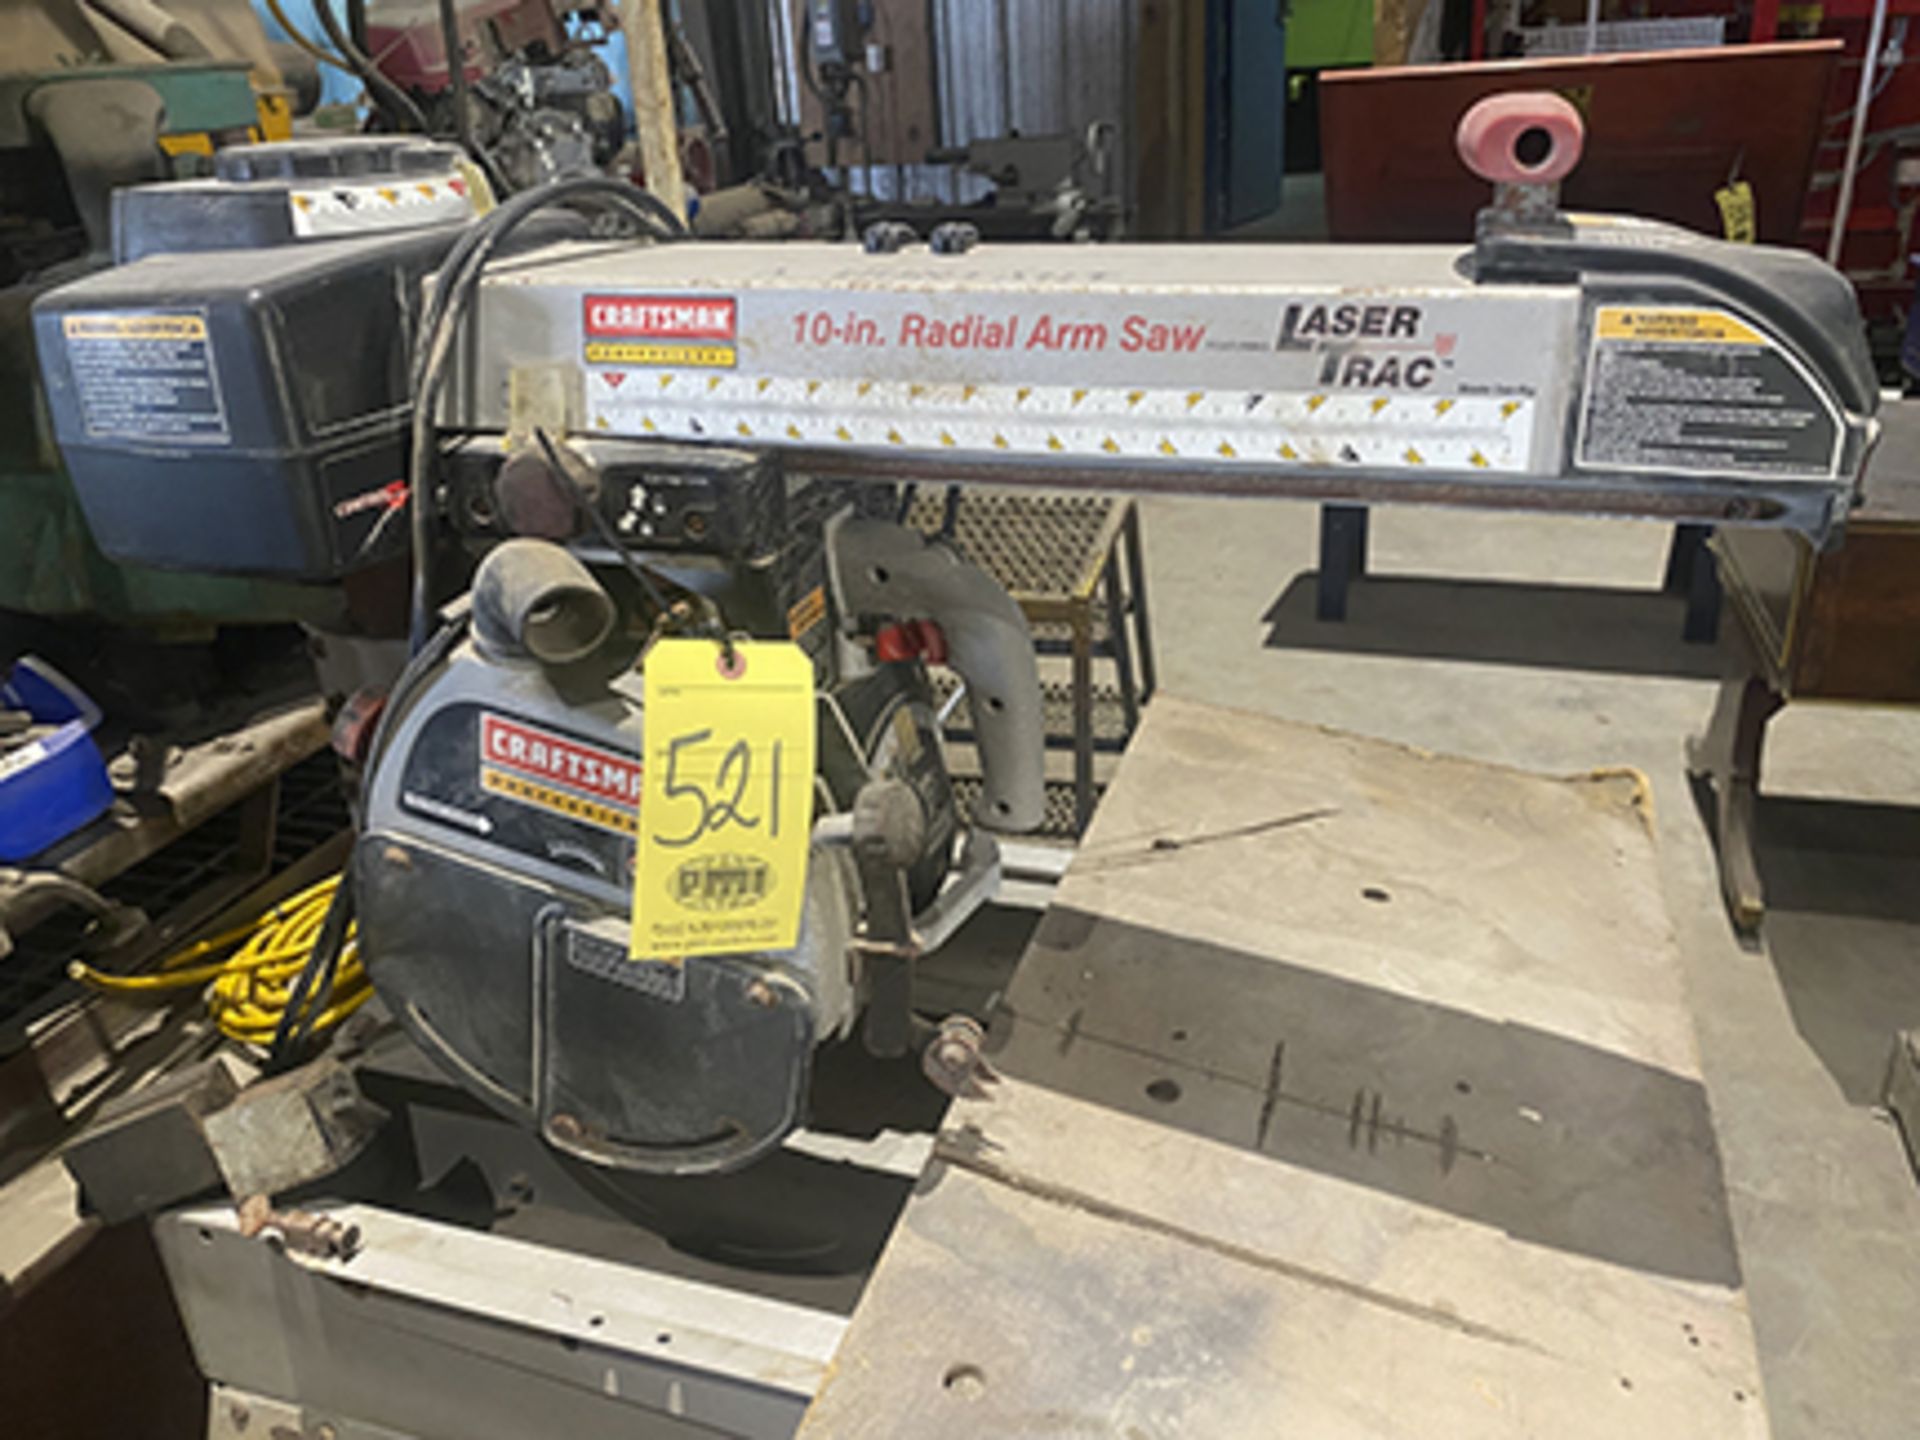 RADIAL ARM SAW, CRAFTSMAN 10", w/Laser Trac (Located at: Liberty Plant Maintenance, 1825 County Road - Image 2 of 2